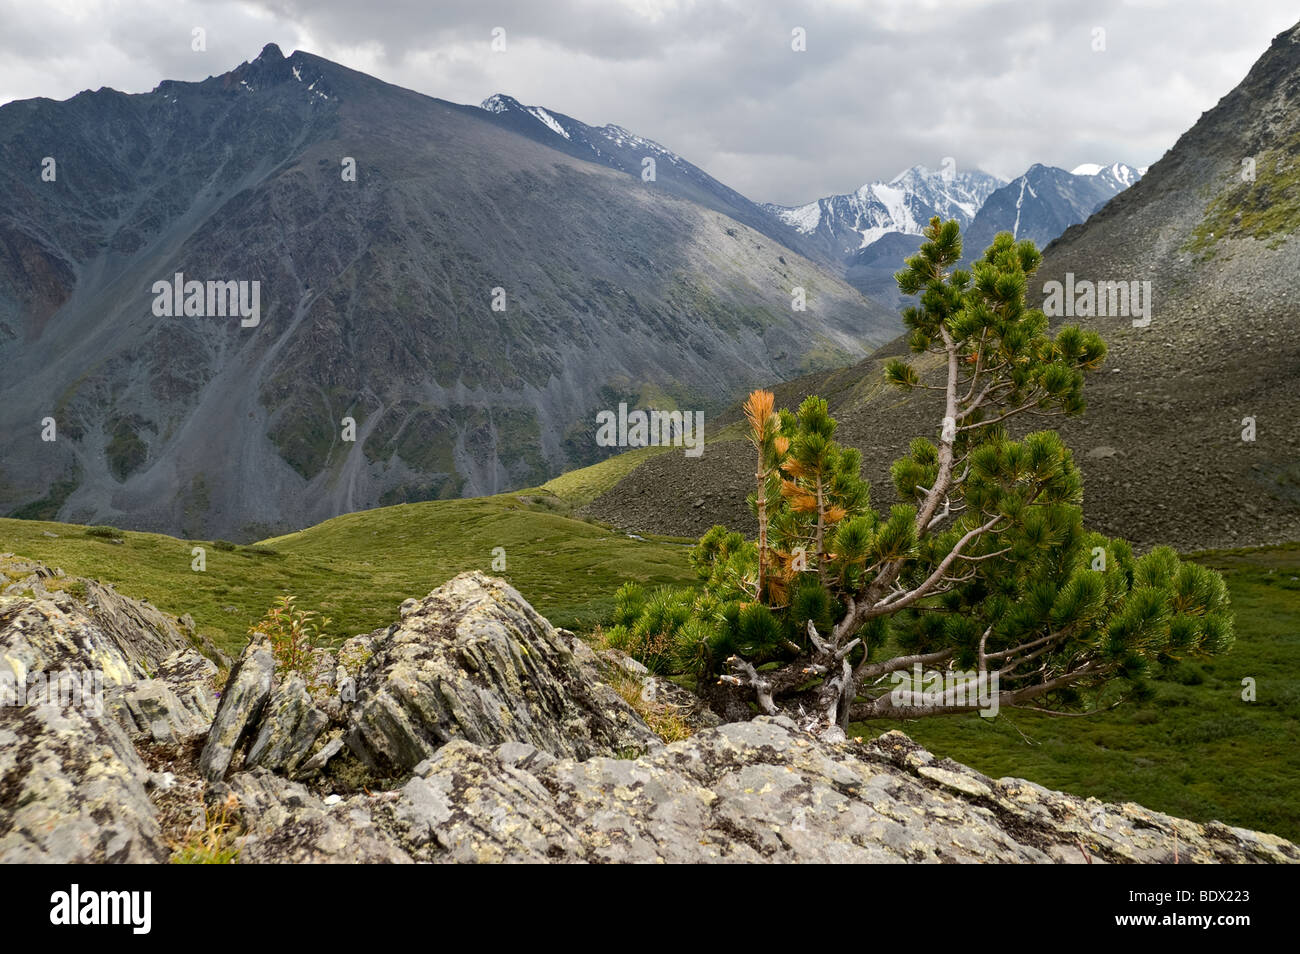 Siberian pine tree (Pinus sibirica) growing out of rock in the Valley of Seven Lakes. Altai, Russia. Stock Photo